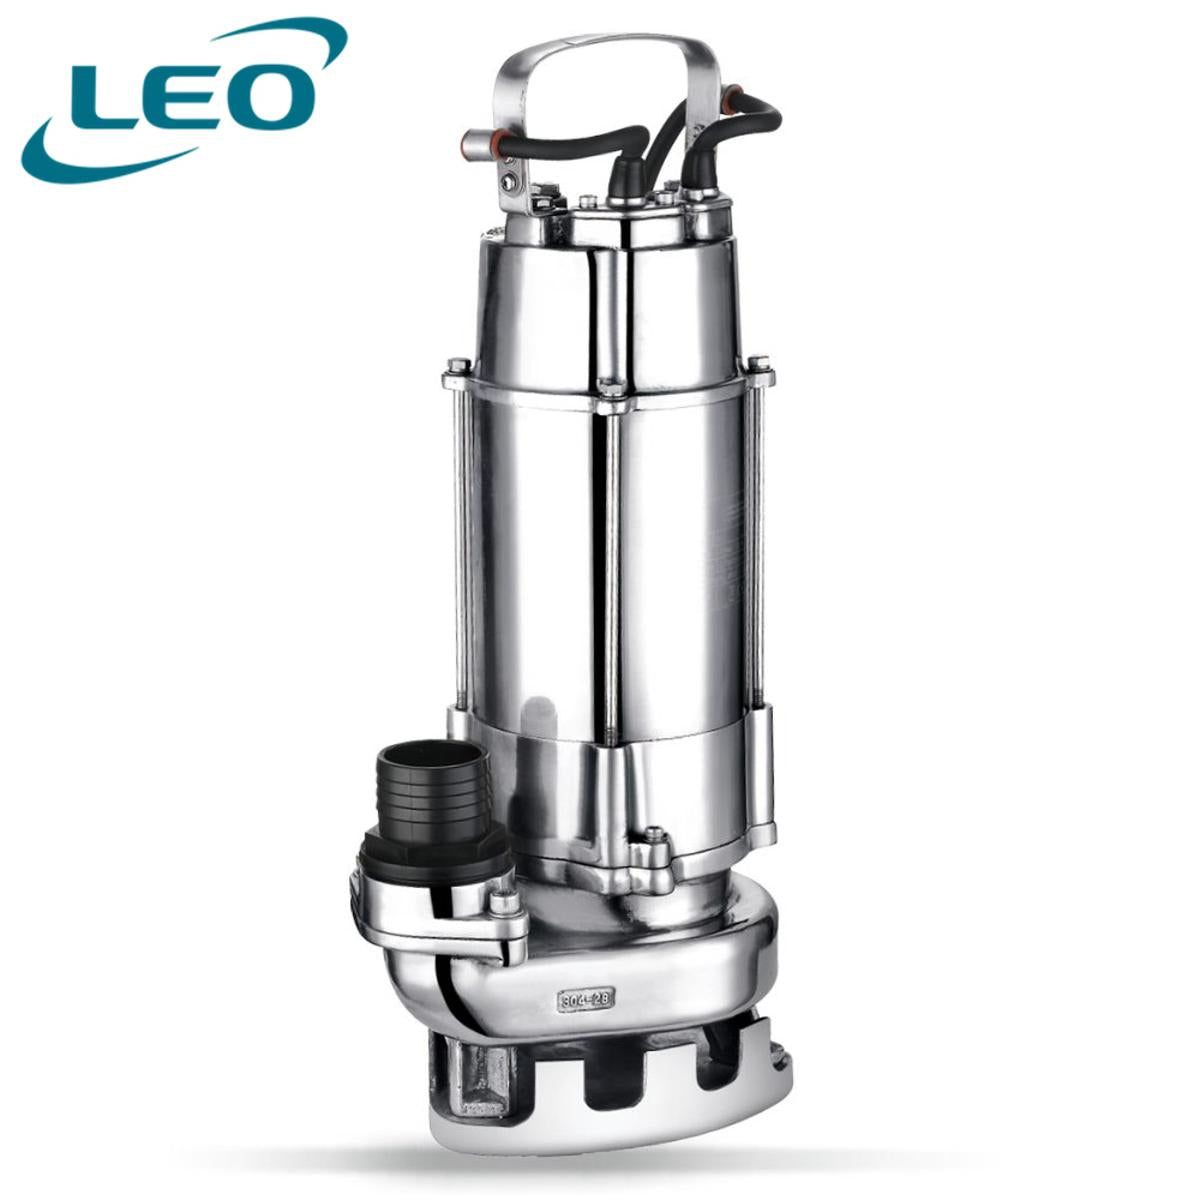 LEO - XSP-18-12-0.75S - 750 W - 1 HP - CASTED Stainless Steel Sewage Submersible Pump With FLOAT SWITCH FOR AUTOMATIC OPERATION - European STANDARD